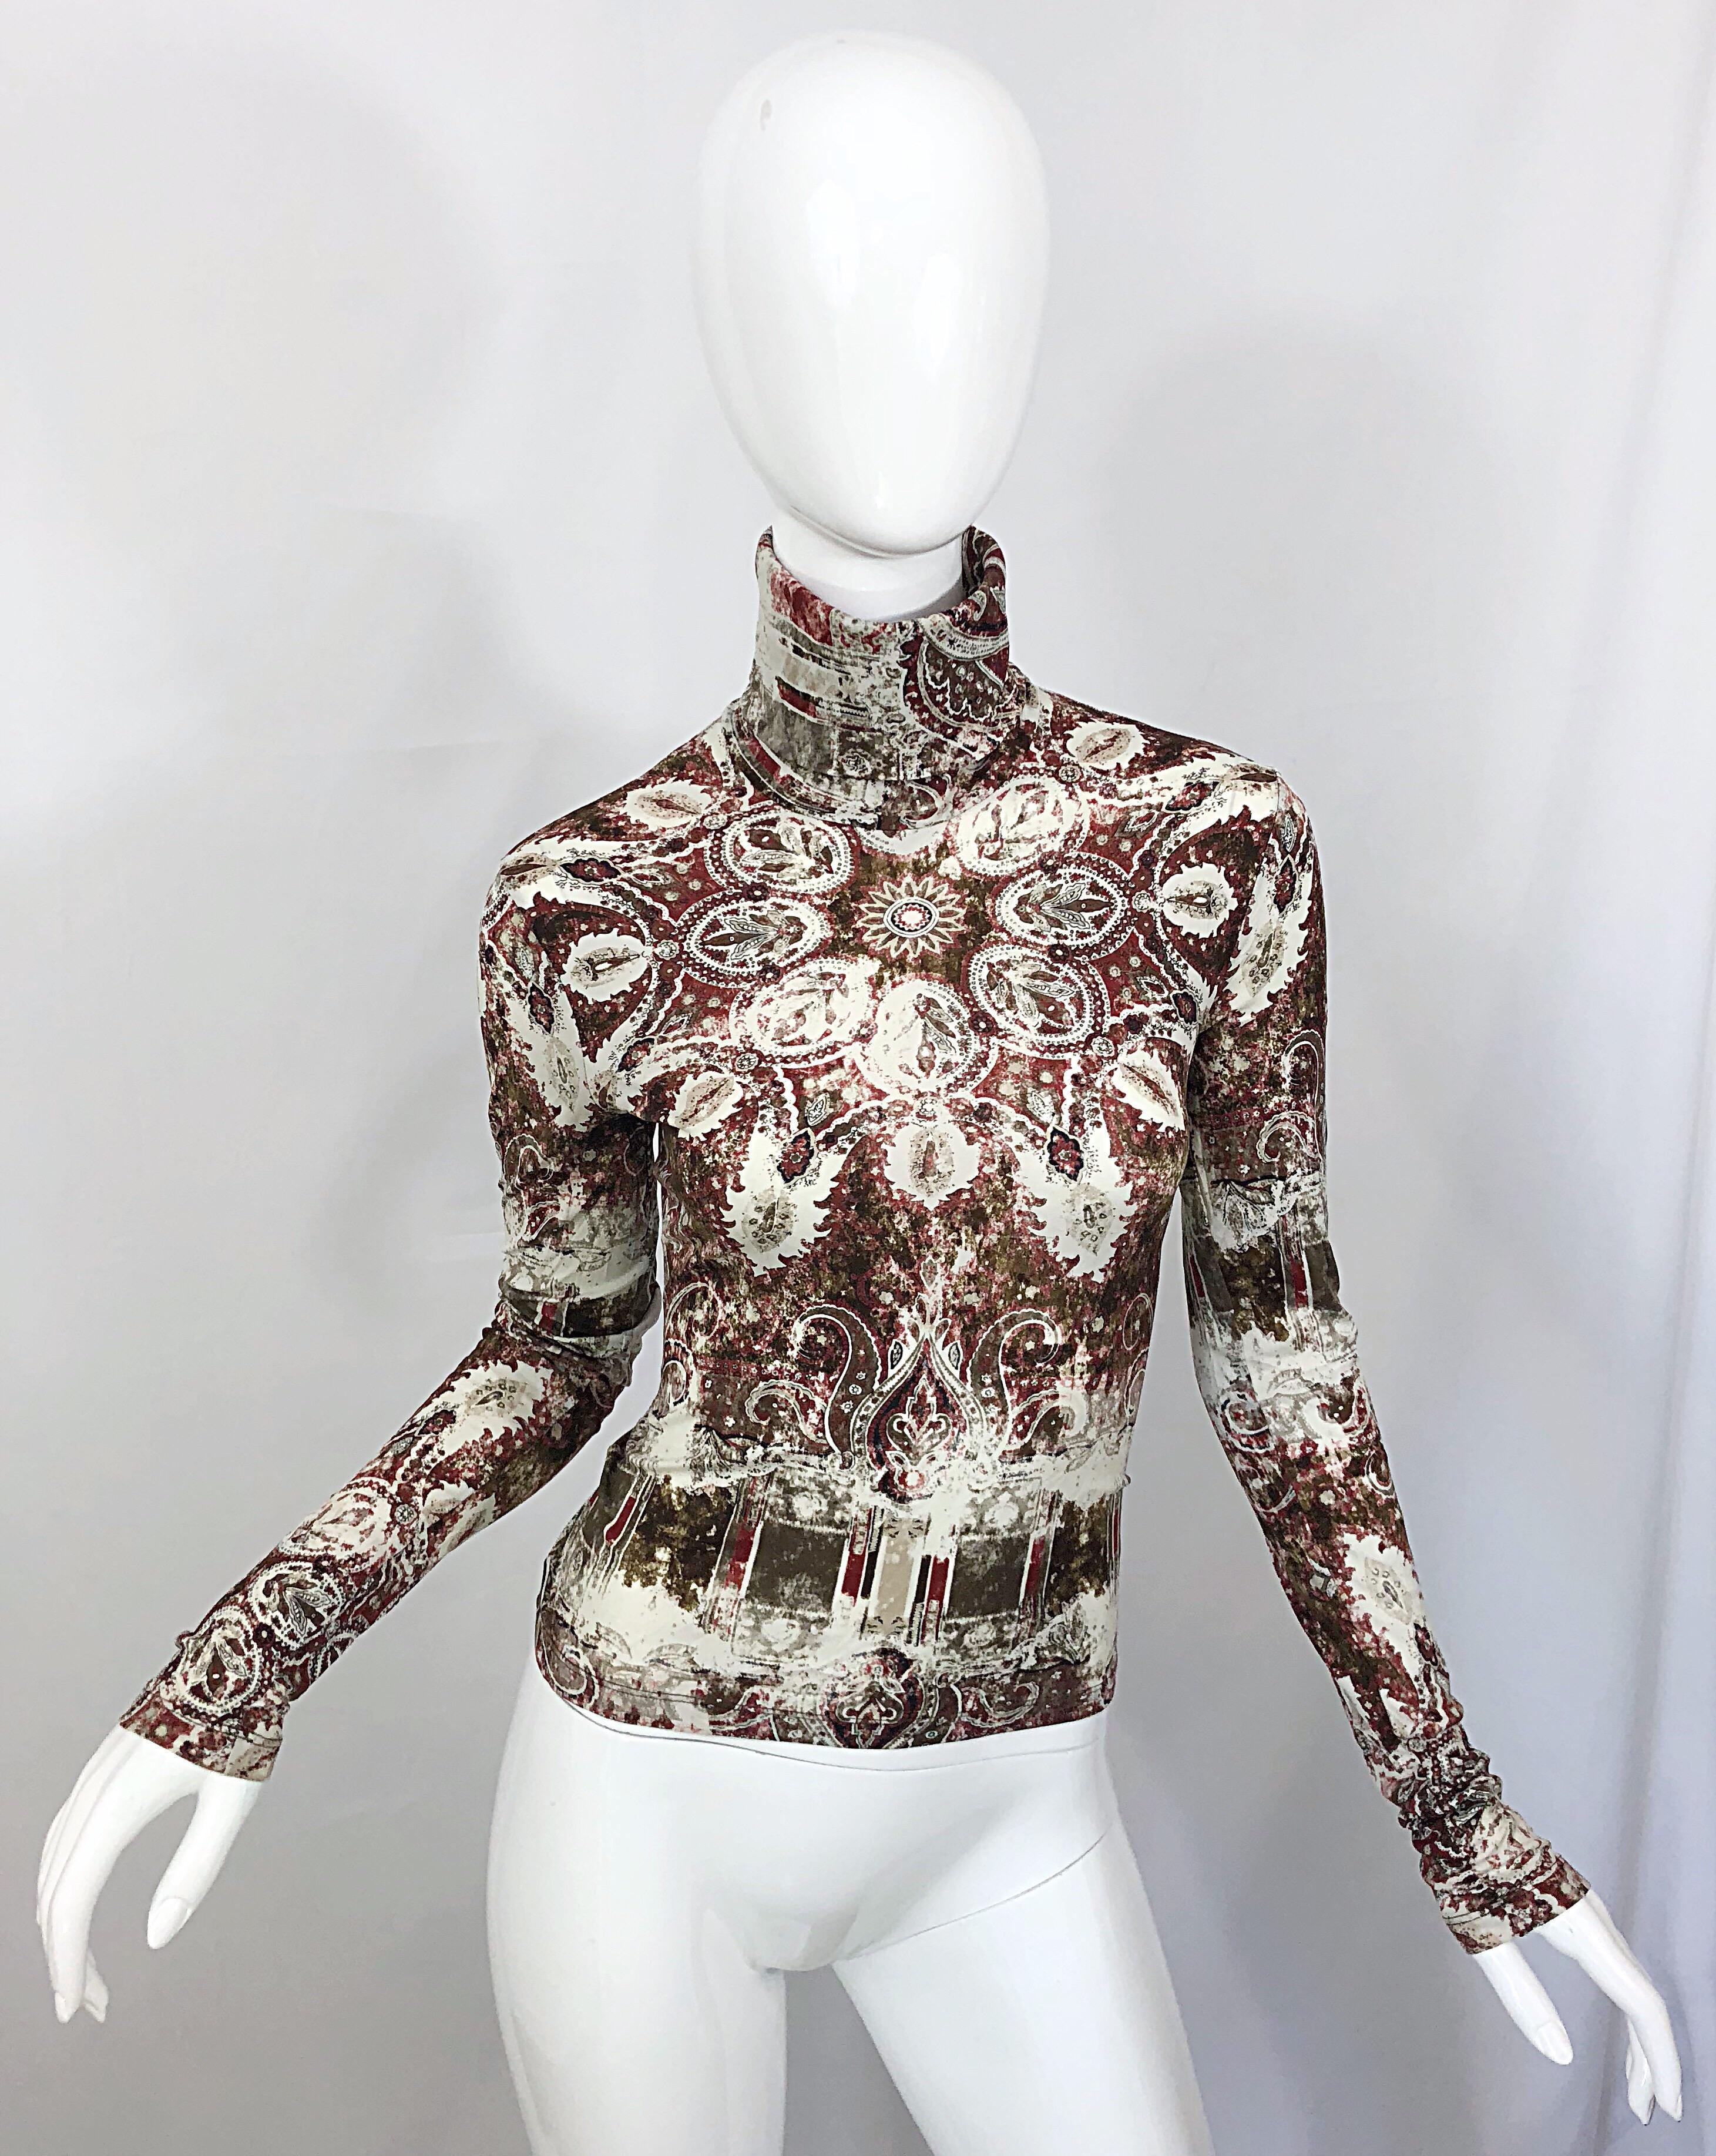 Amazing vintage late 90s JEAN PAUL GAULTIER distressed medallion paisley print turtleneck shirt! Features warm hues of red, forest green, brown, taupe and white throughout. Super soft classic Gaultier Nylon jersey stretches to fit. Can easily be